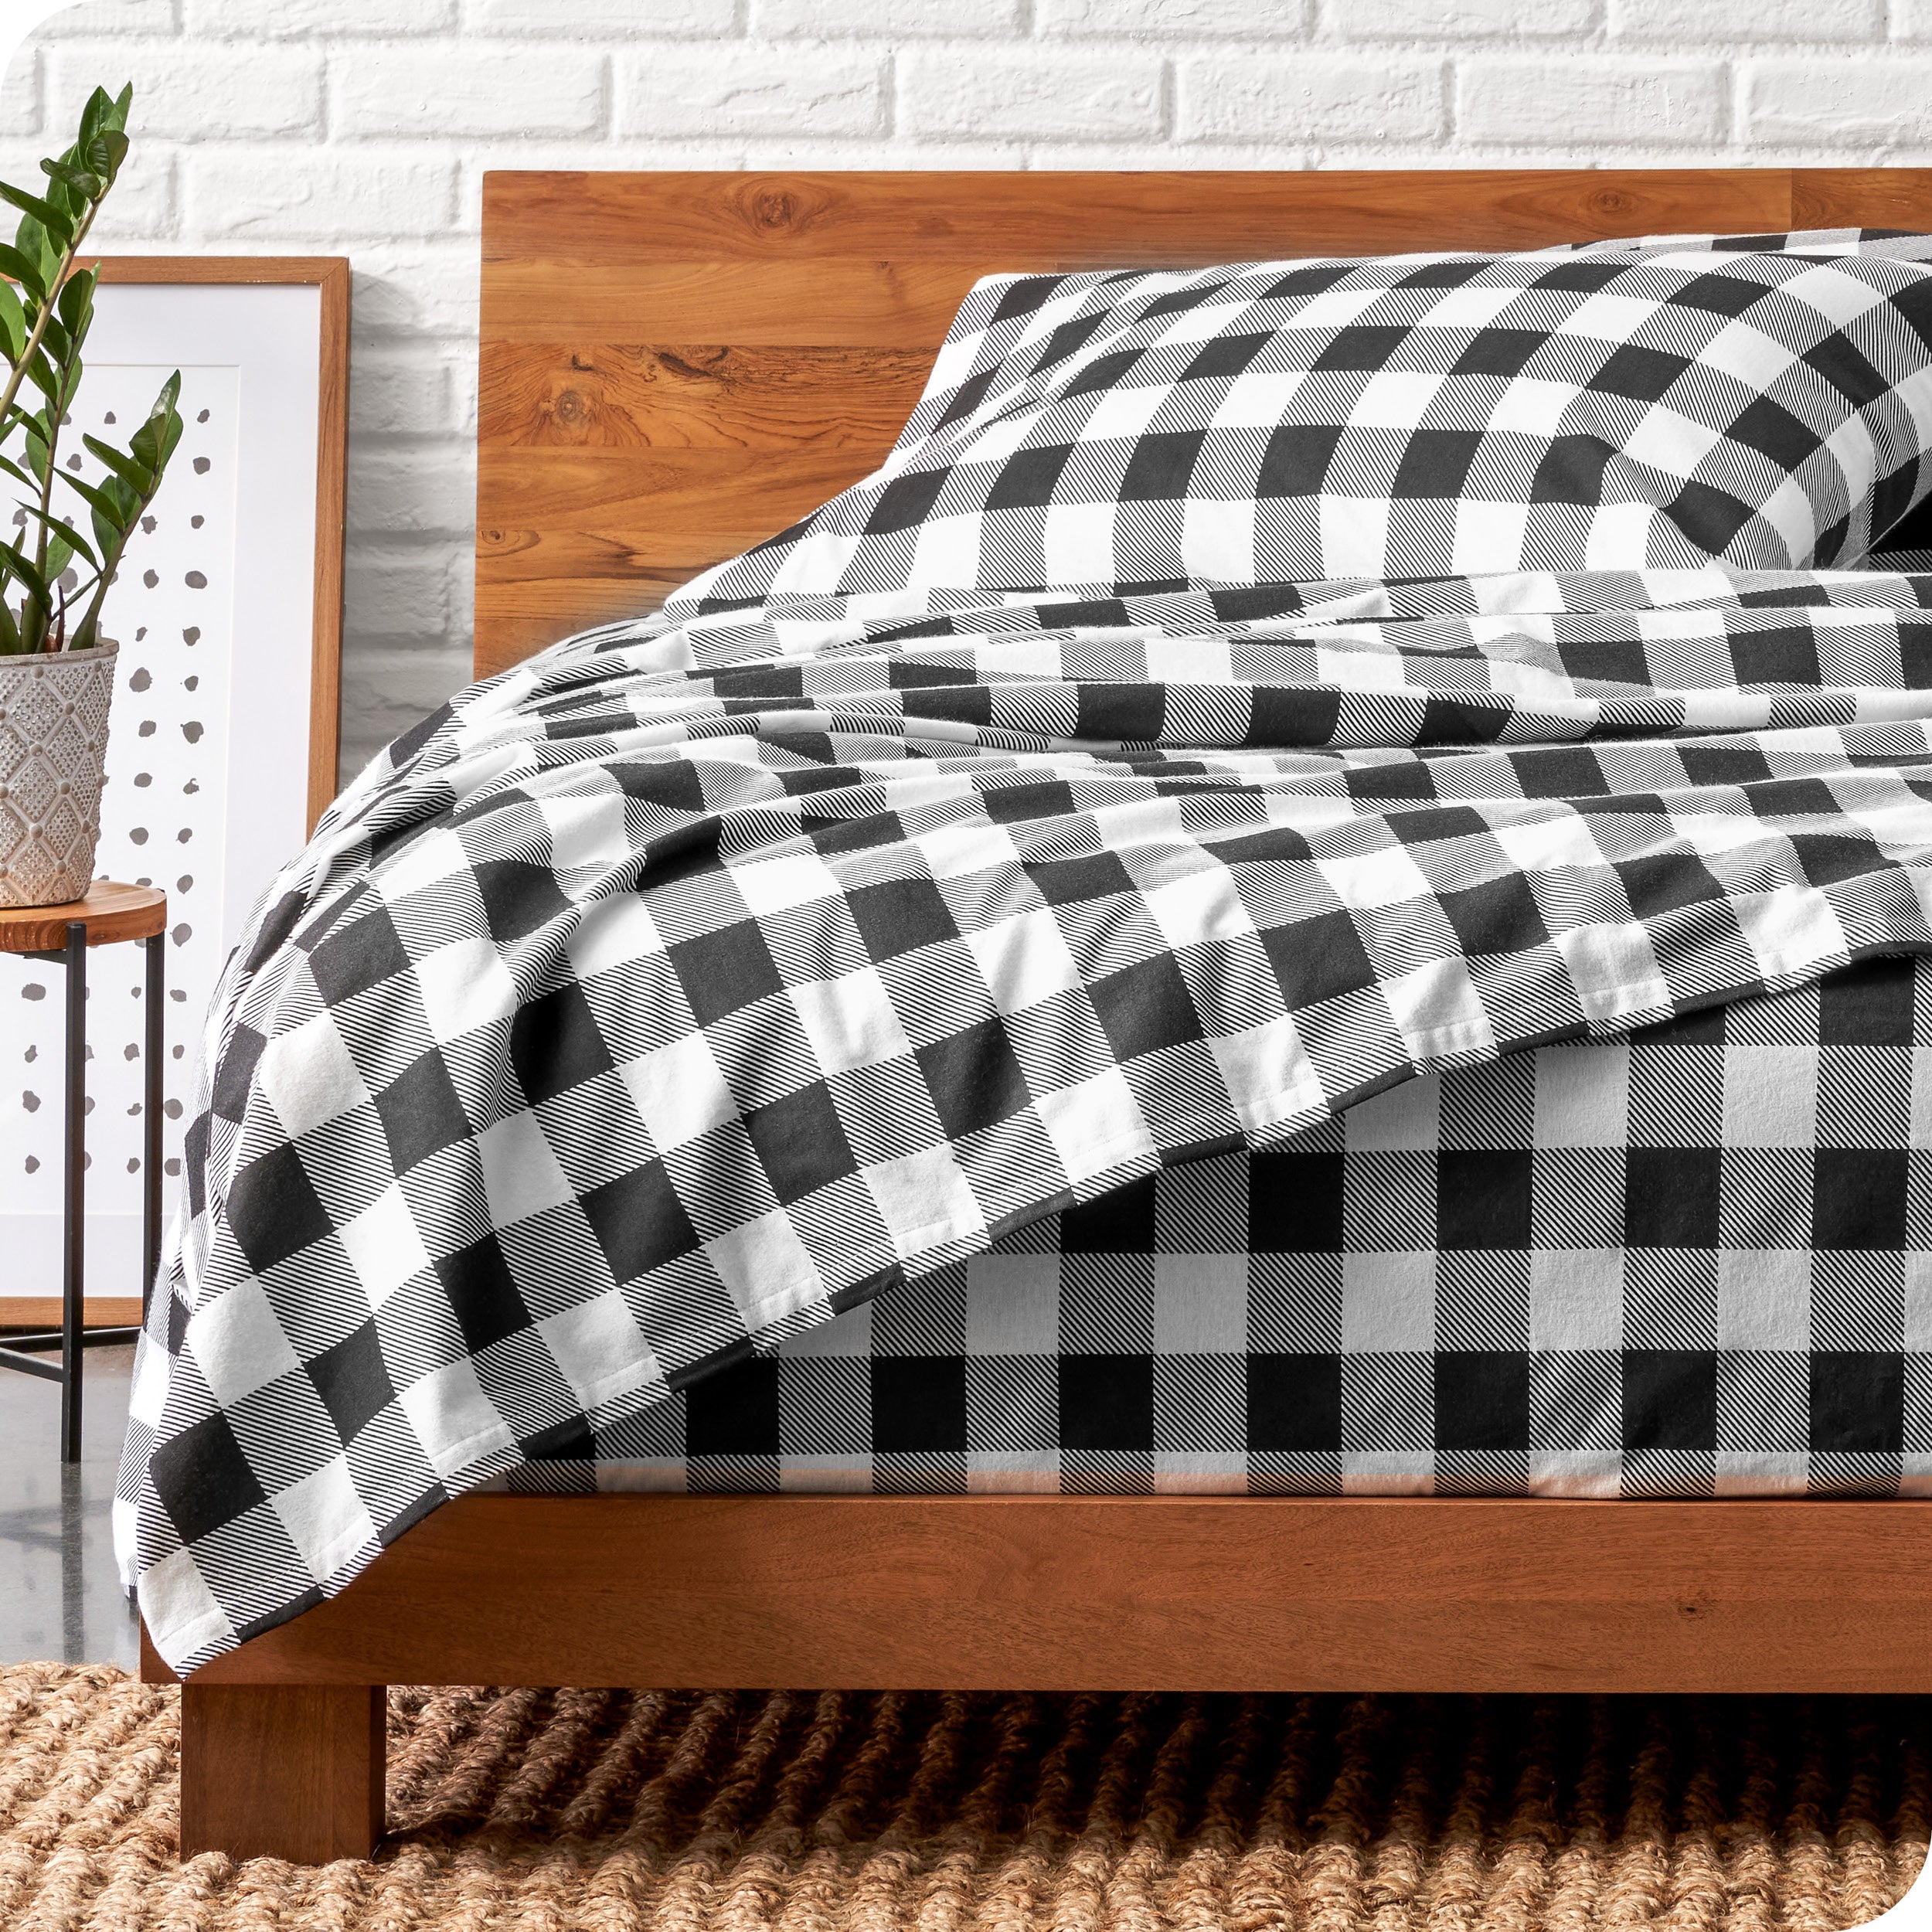 Wooden bed frame with flannel print sheets on the bed